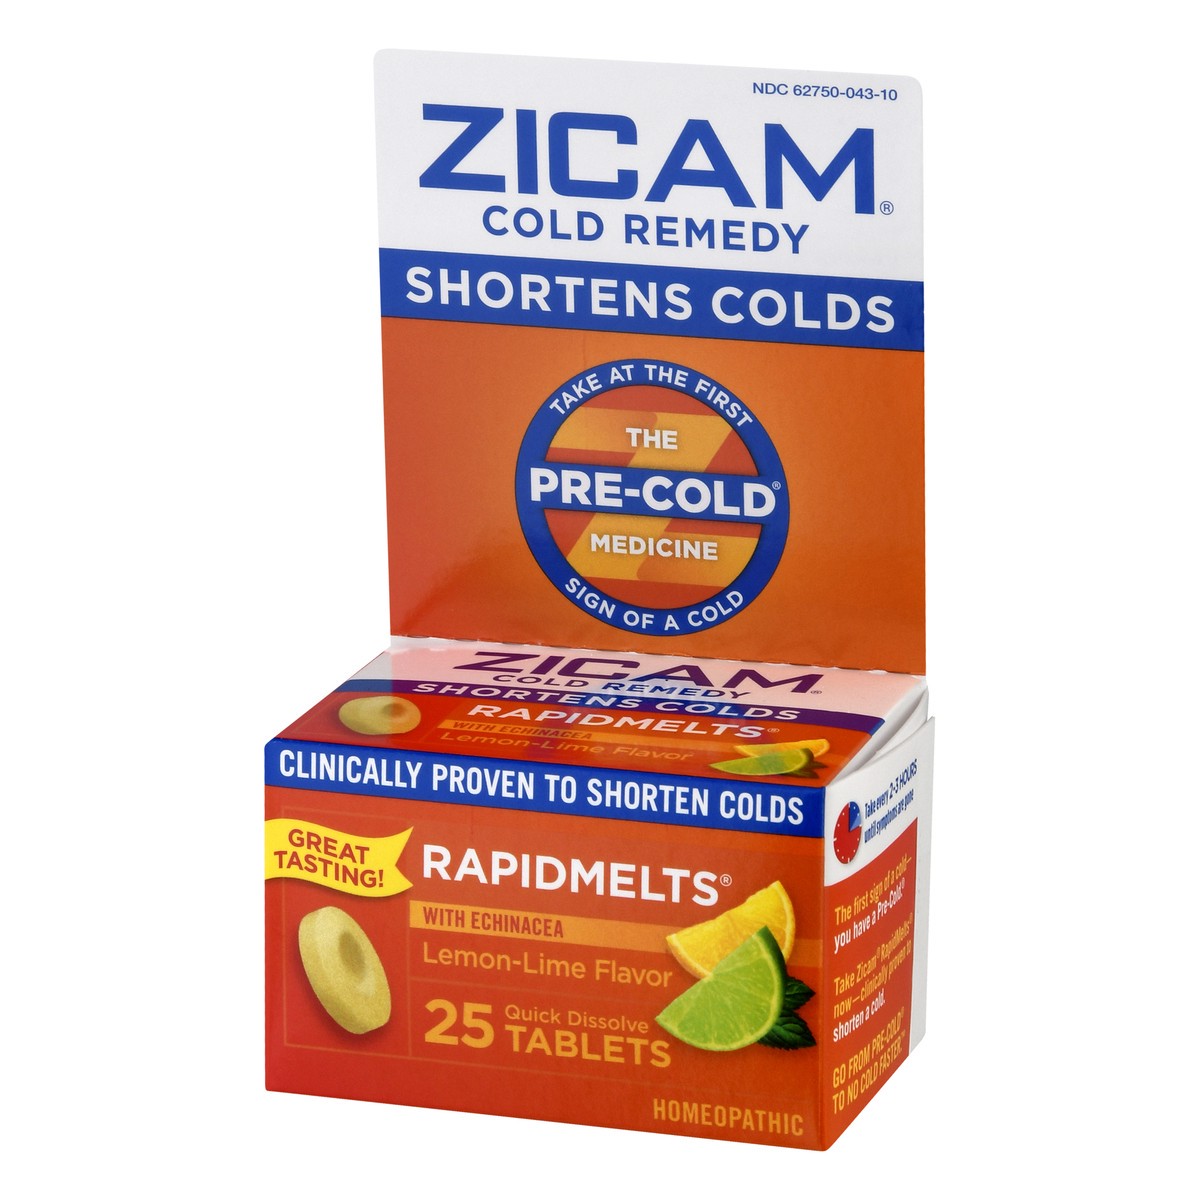 slide 5 of 9, Zicam Cold Remedy Zinc Rapidmelts, Lemon Lime Flavor, with Echinacea, Homeopathic, Cold Shortening Medicine, Shortens Cold Duration, Sugar-Free, Dye-Free, 18 Count, 25 ct